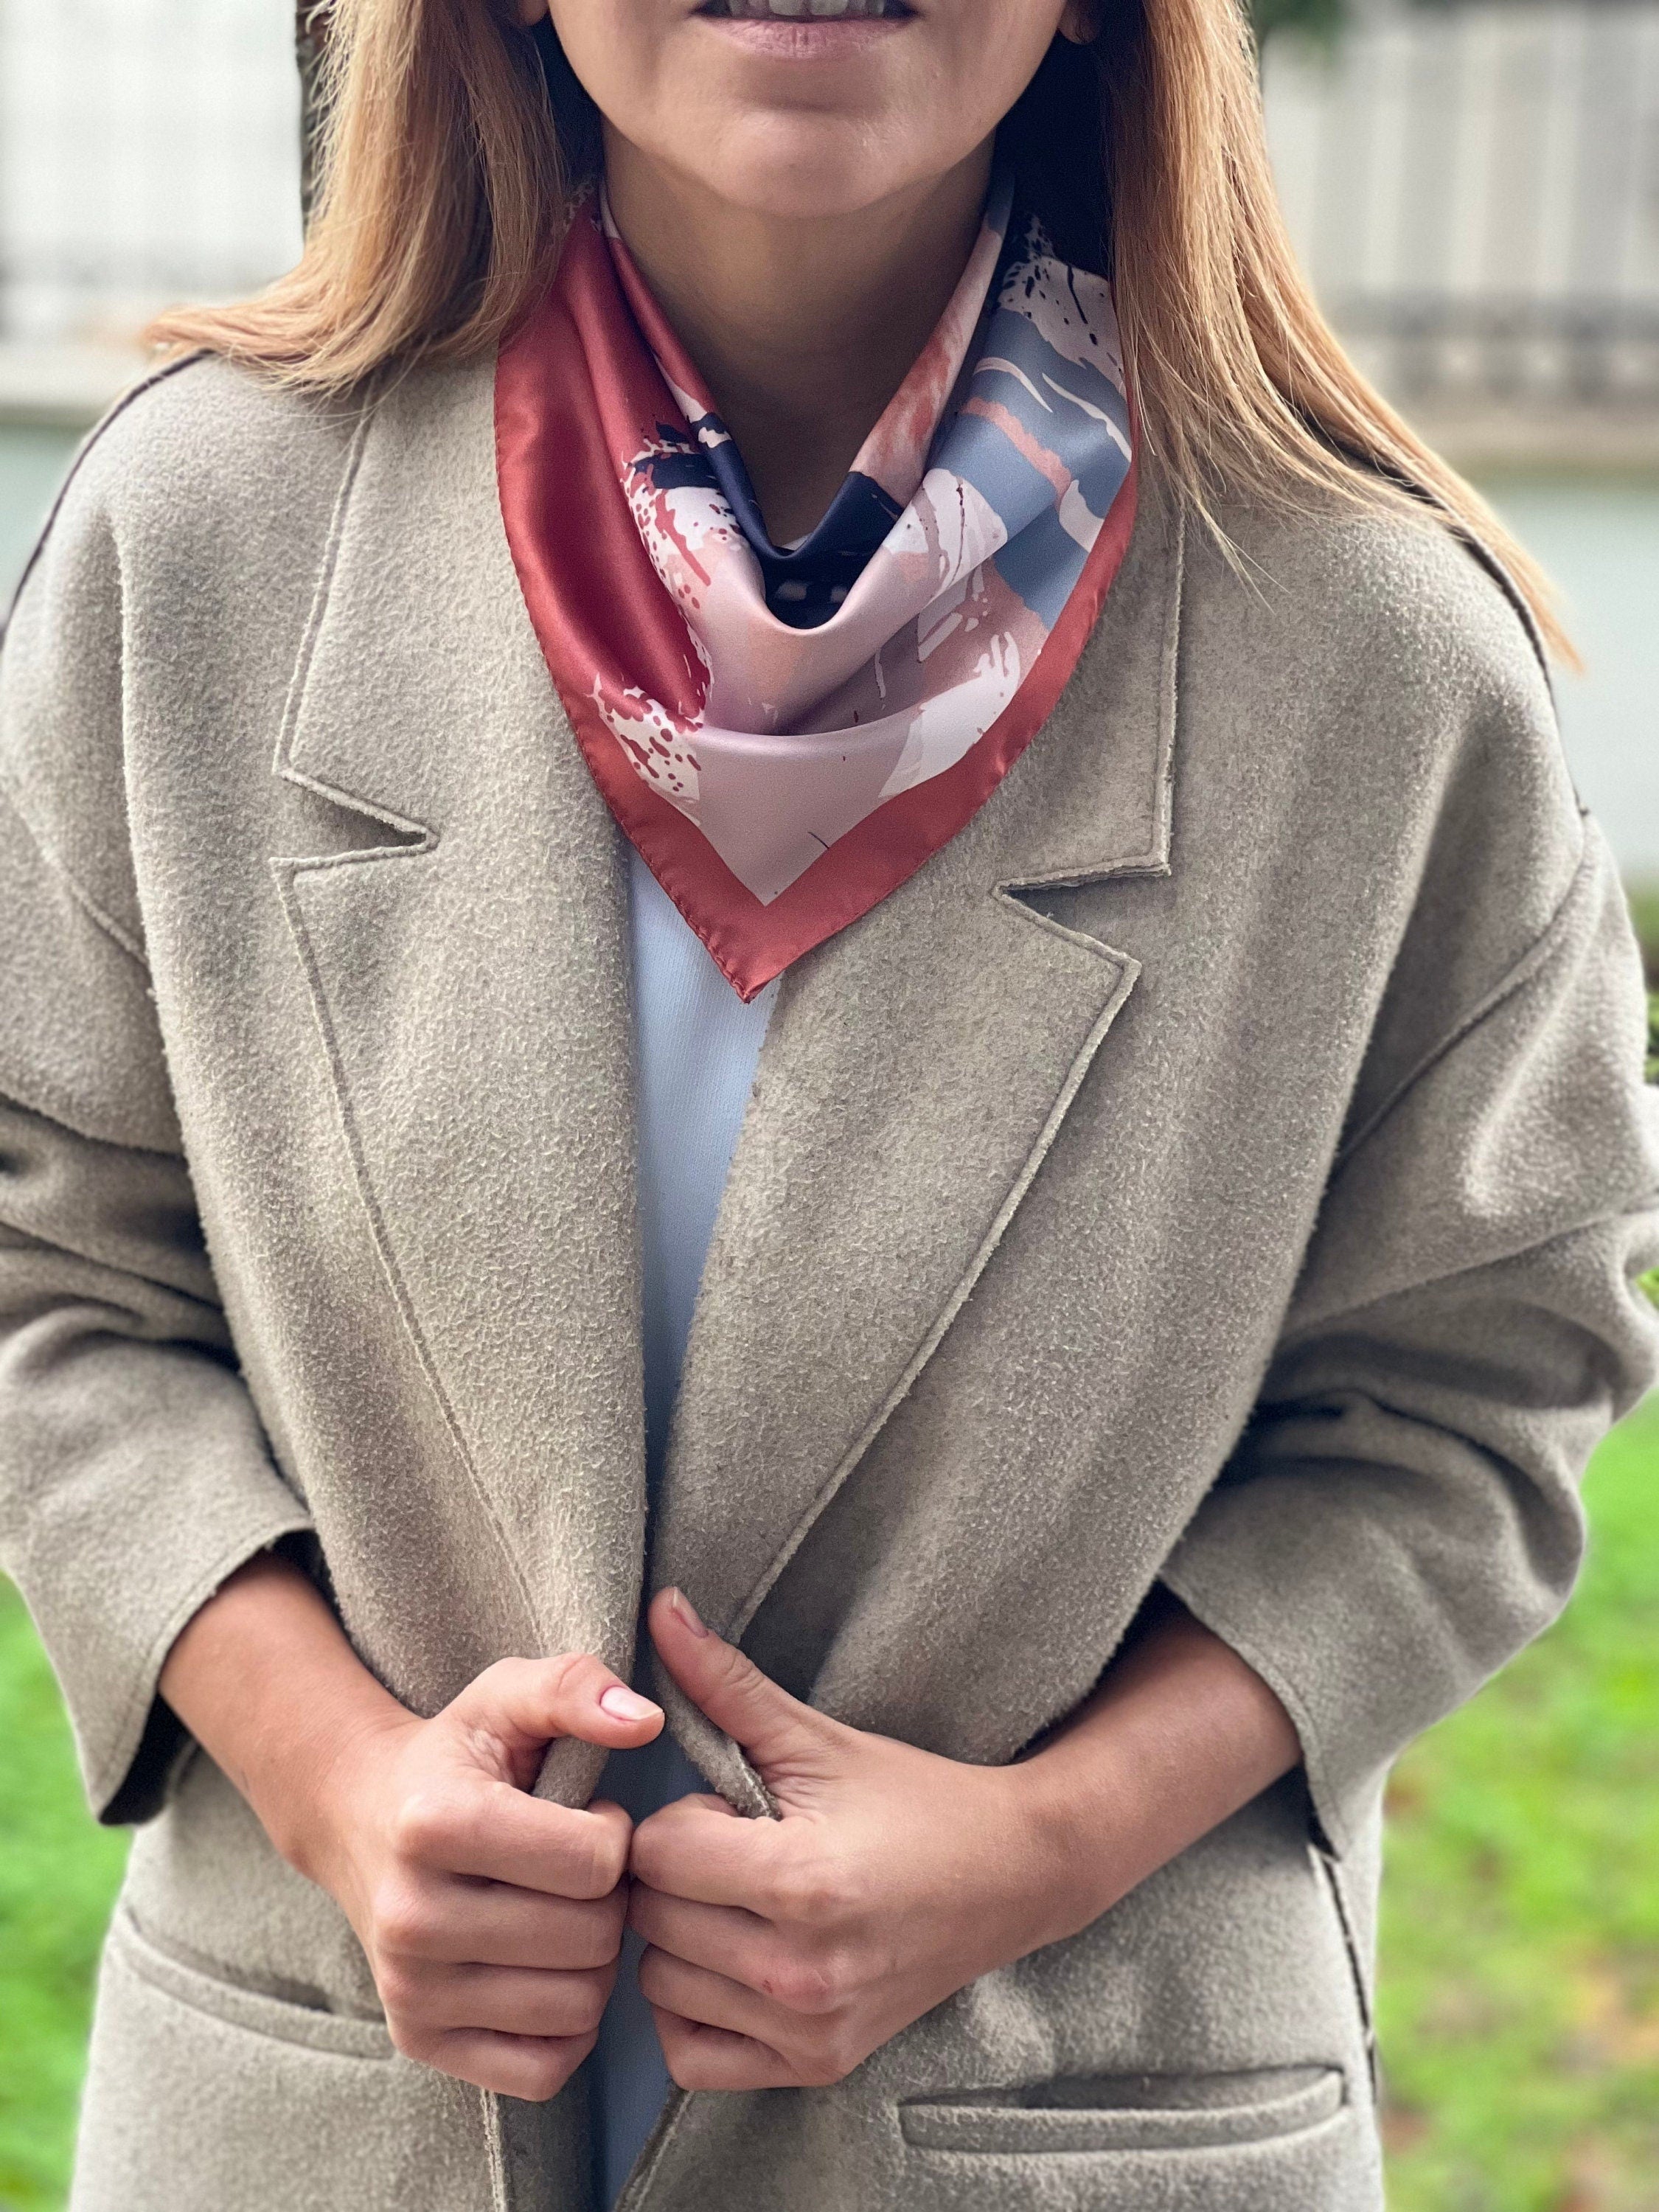 Looking for the perfect gift? Check out our range of hand-painted scarves, designed and made to perfection. Whether you are looking for a birthday present or just want to spoil yourself, we have got you covered!